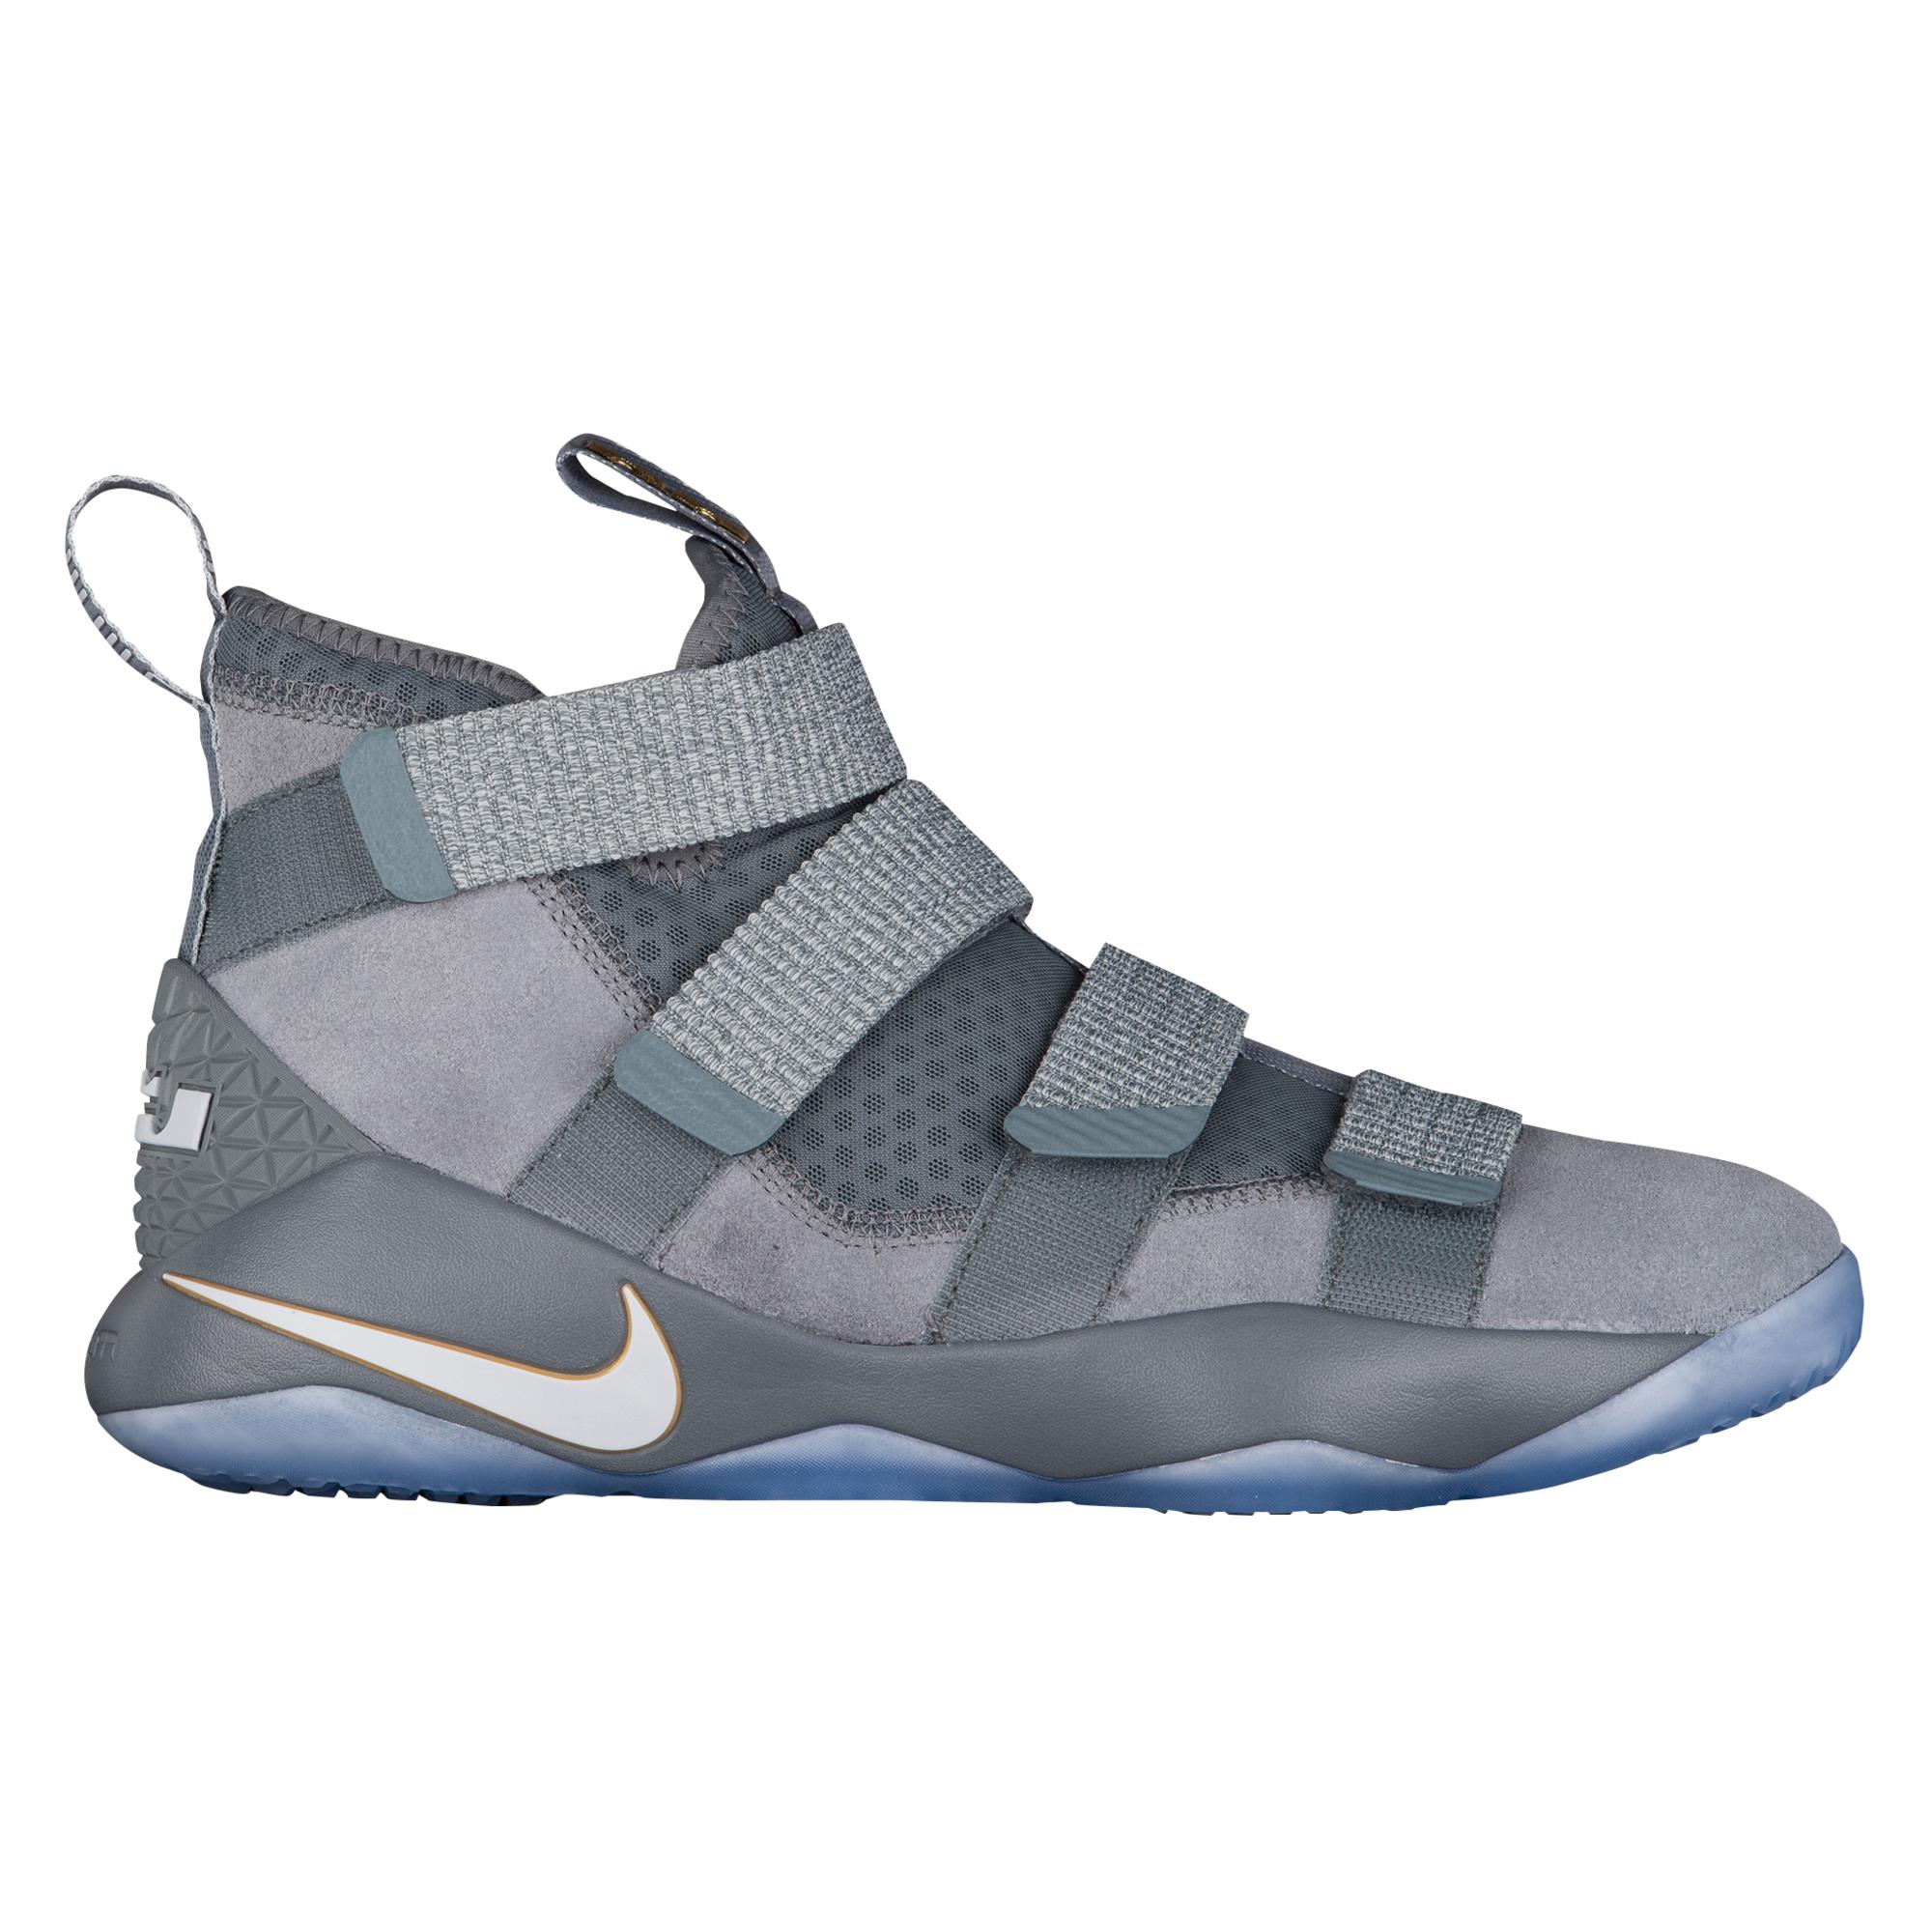 eastbay lebron soldier 11